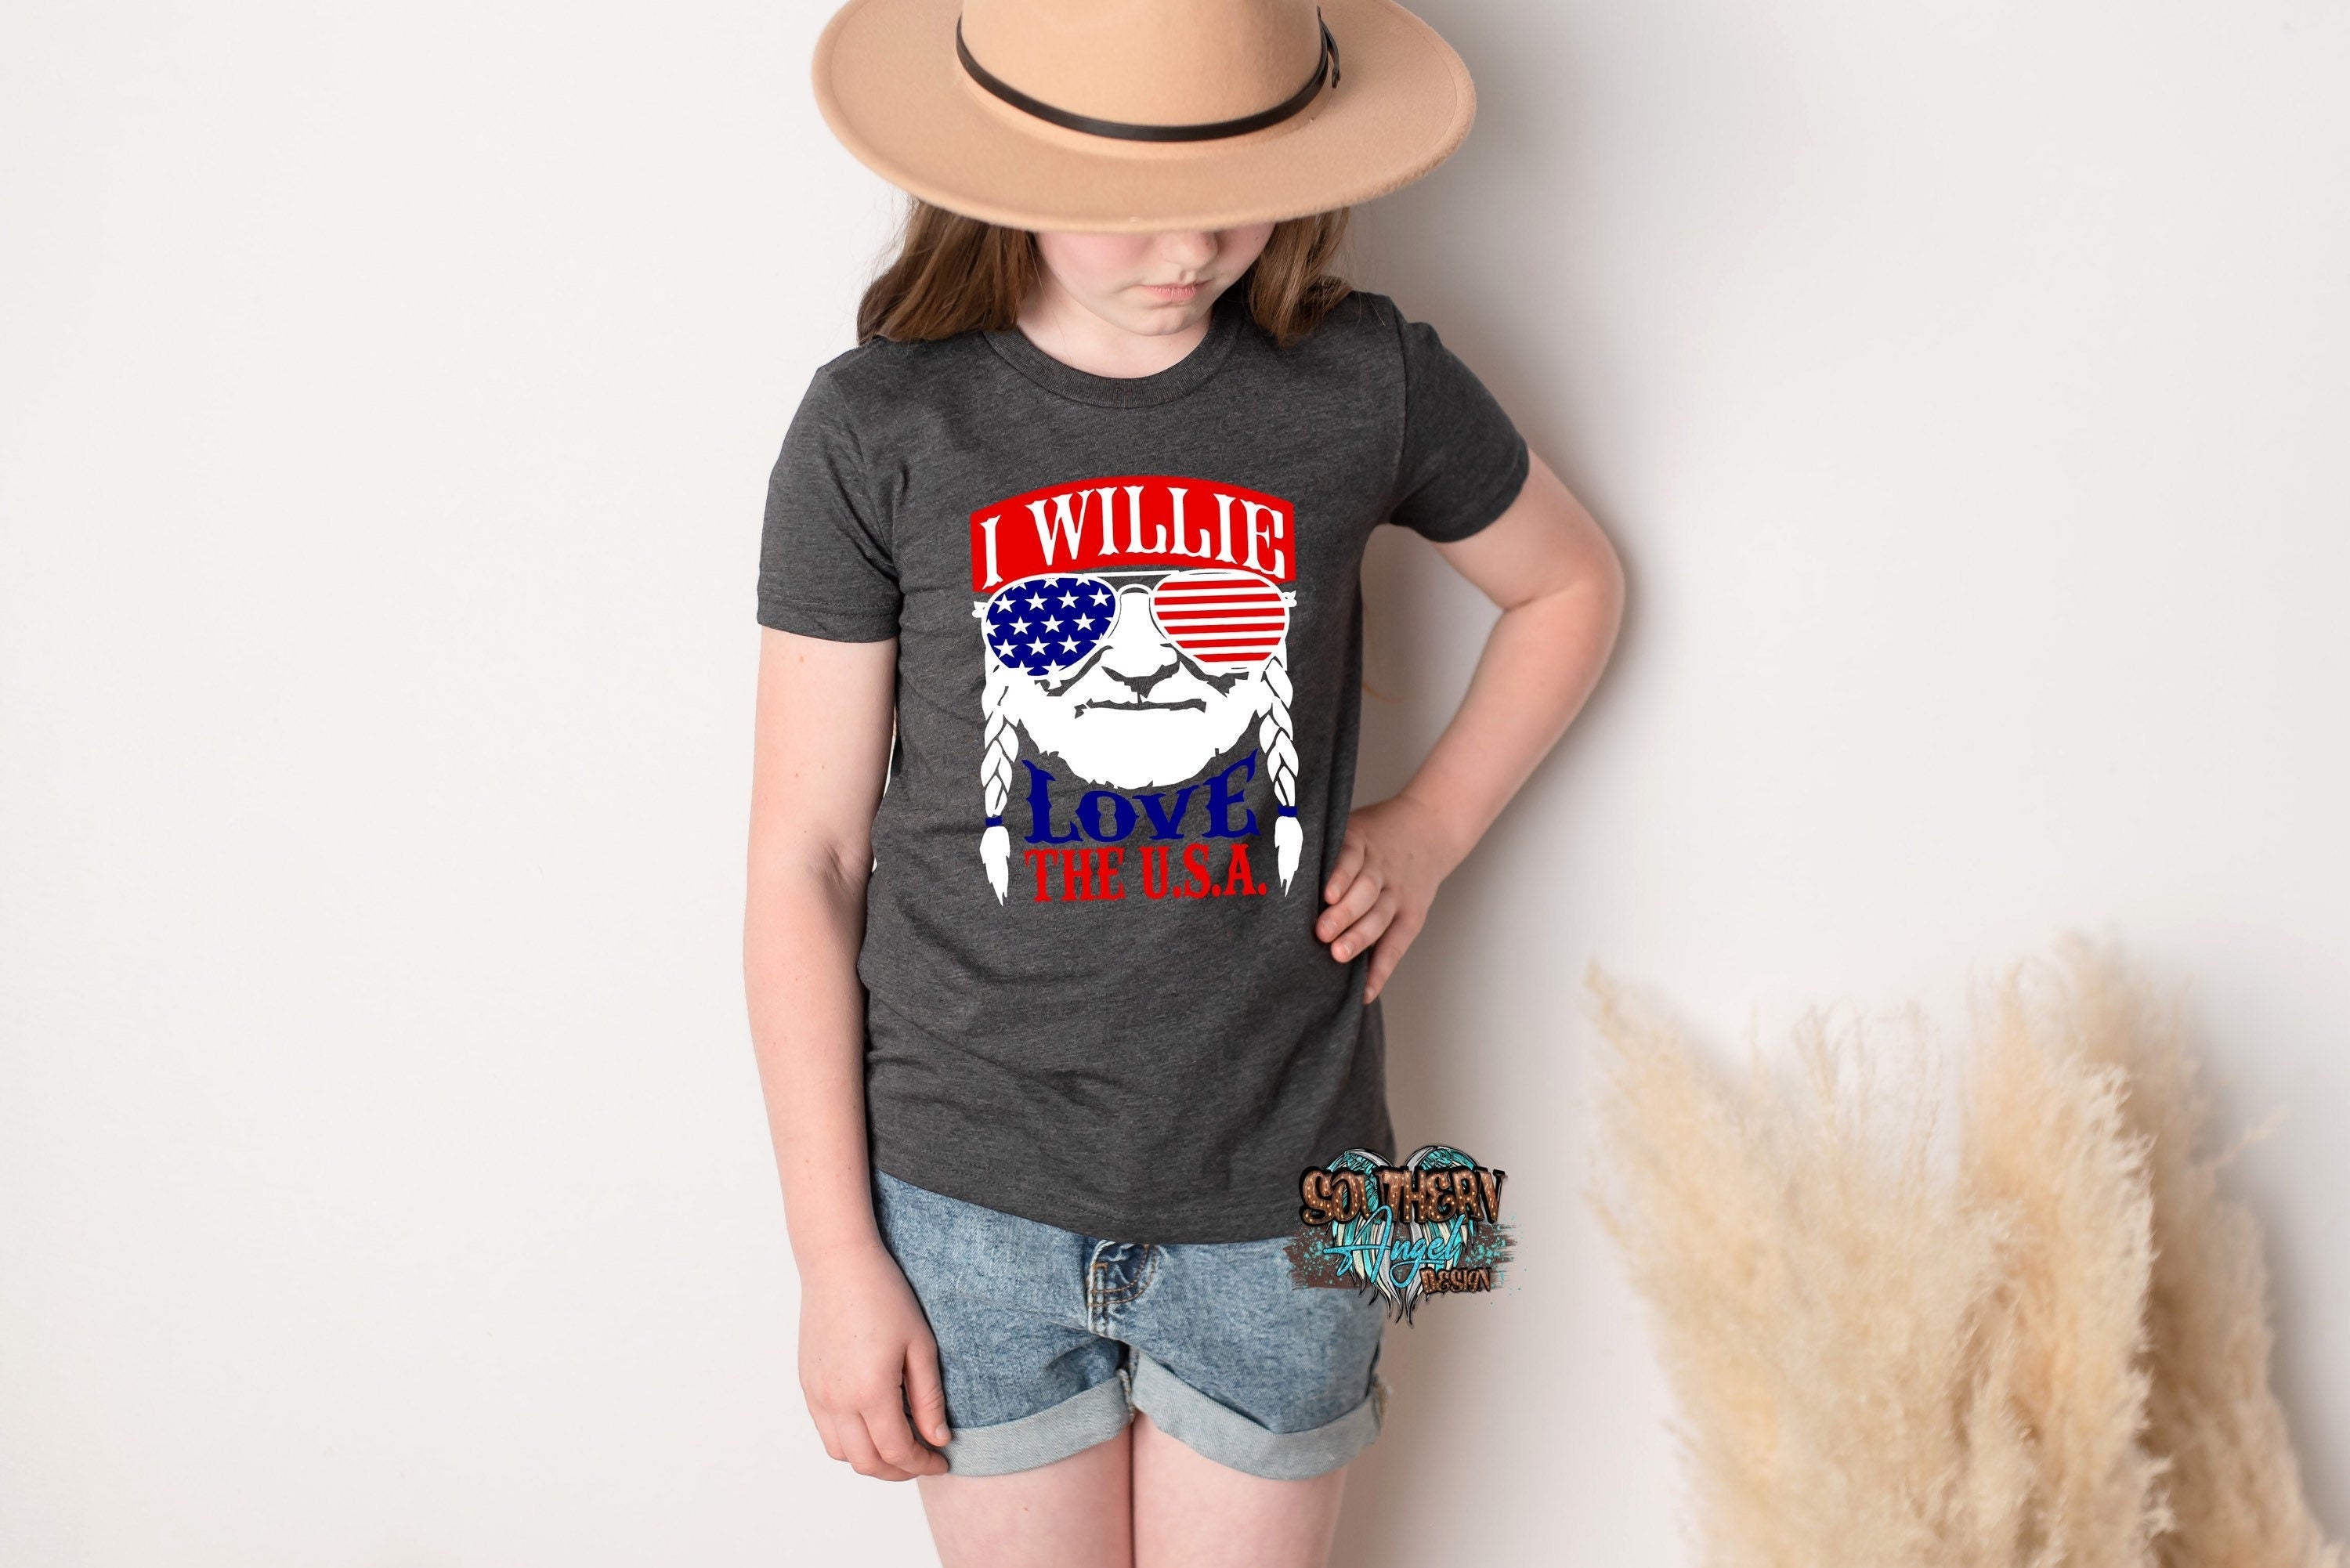 Kid's Fourth Of July shirt | I Willie Love The USA shirt | Kid's independent Day | Toddler 4th of July shirt | Patriotic TShirt | Baby 4th